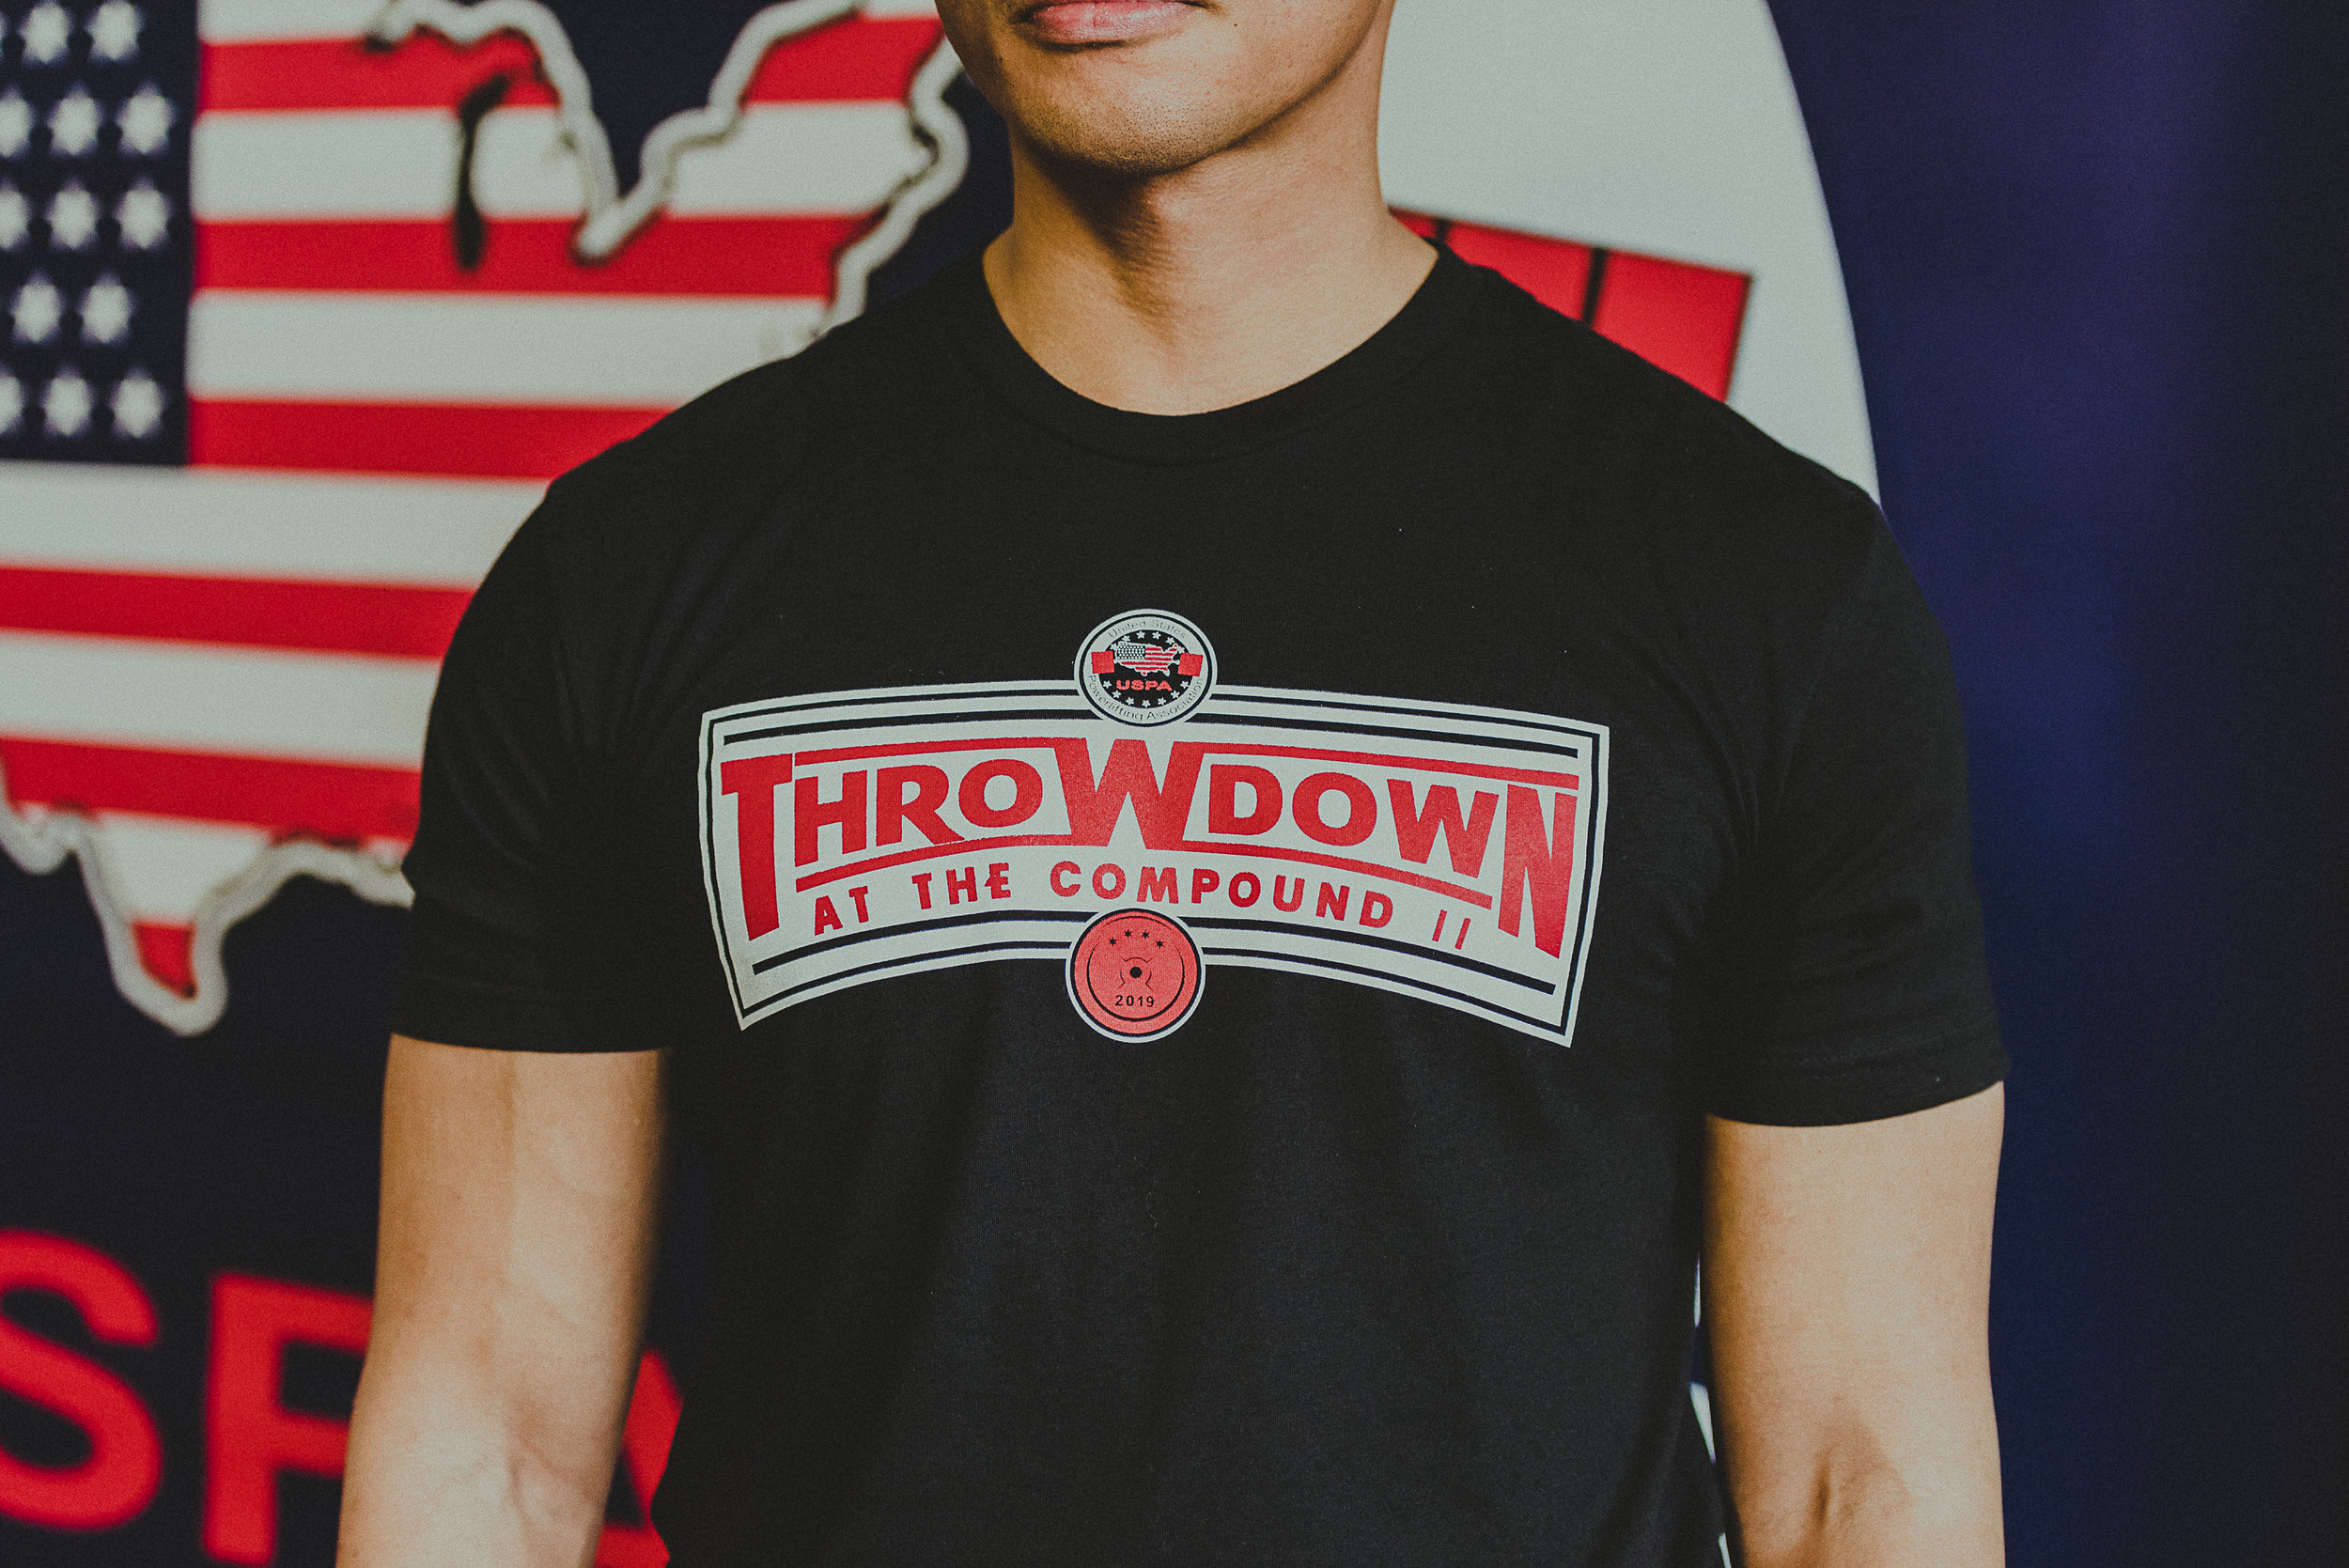   USPA THROWDOWN AT THE COMPOUND II 2019 LOGO    © PHOTOGRAPHED BY ARIELLE GALLIONE    